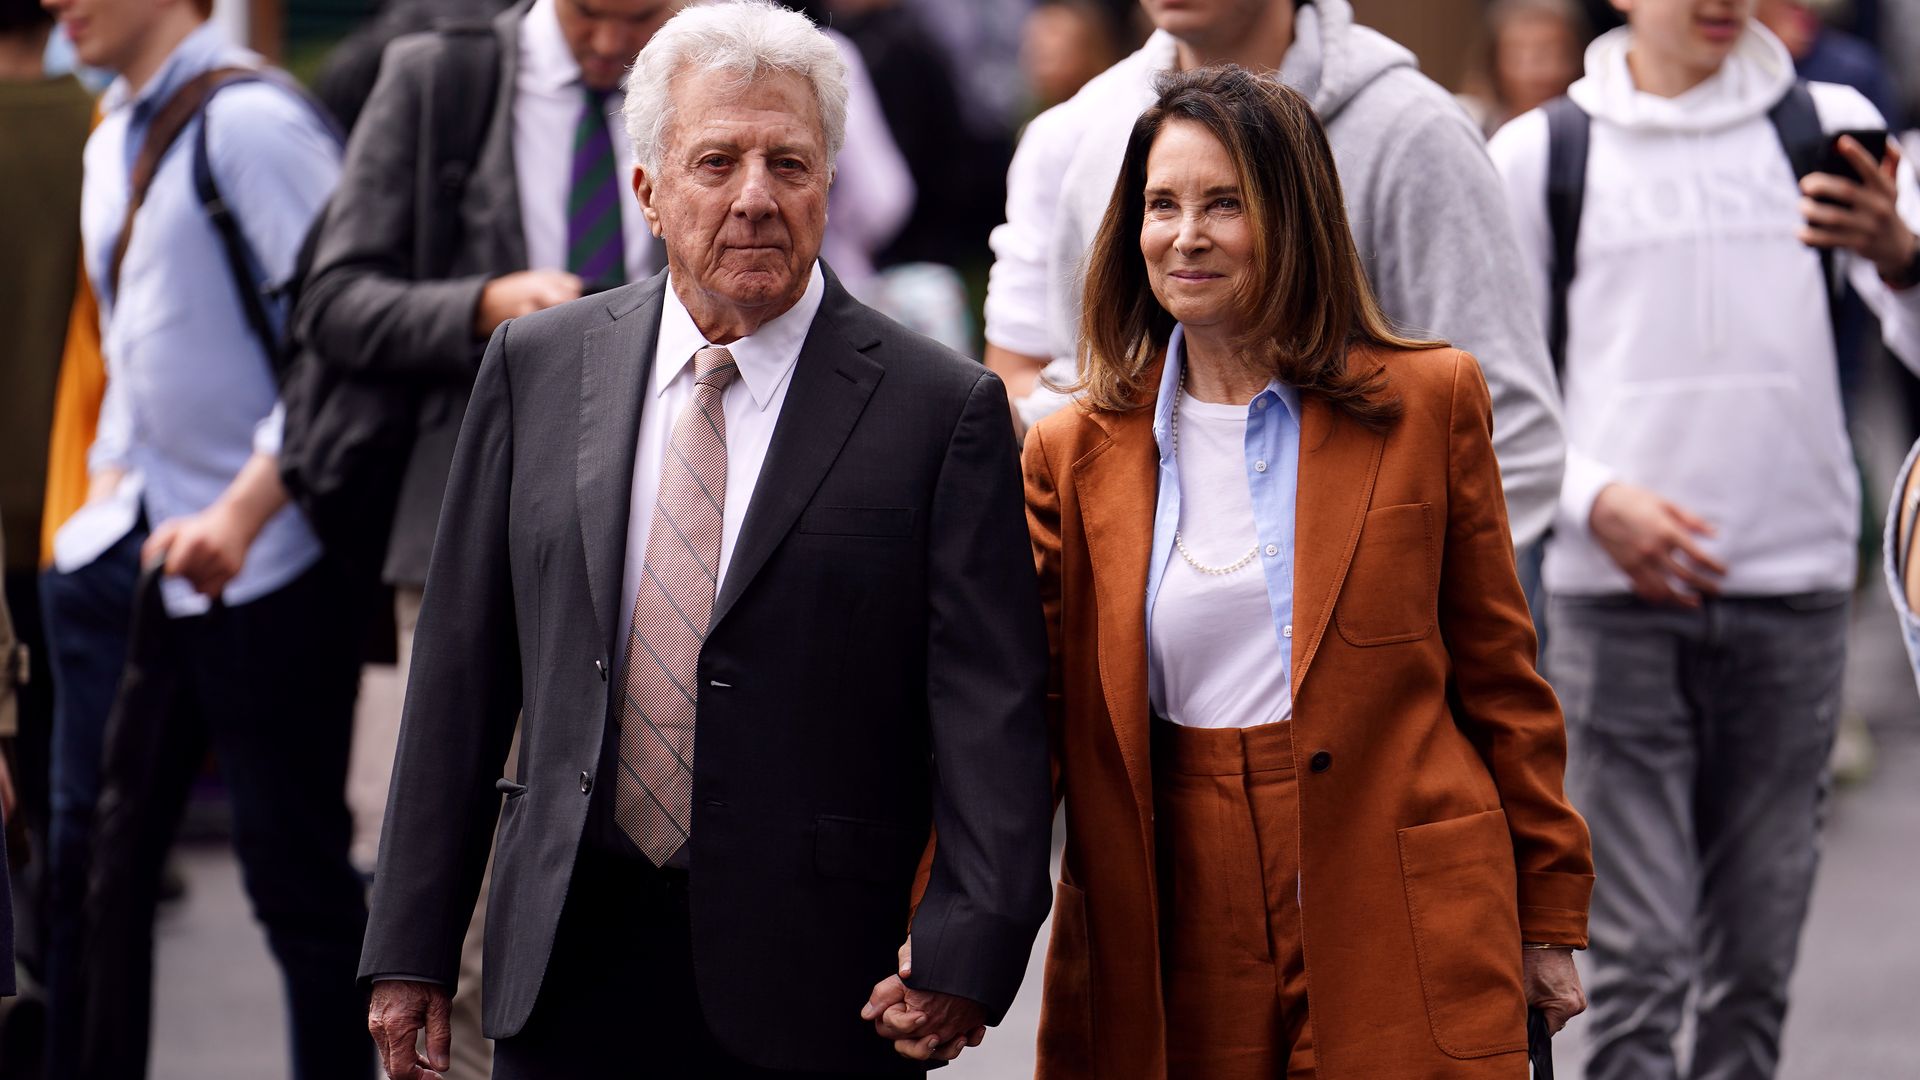 Dustin Hoffman and his wife Lisa lead celebrity arrivals on Day 5 of Wimbledon